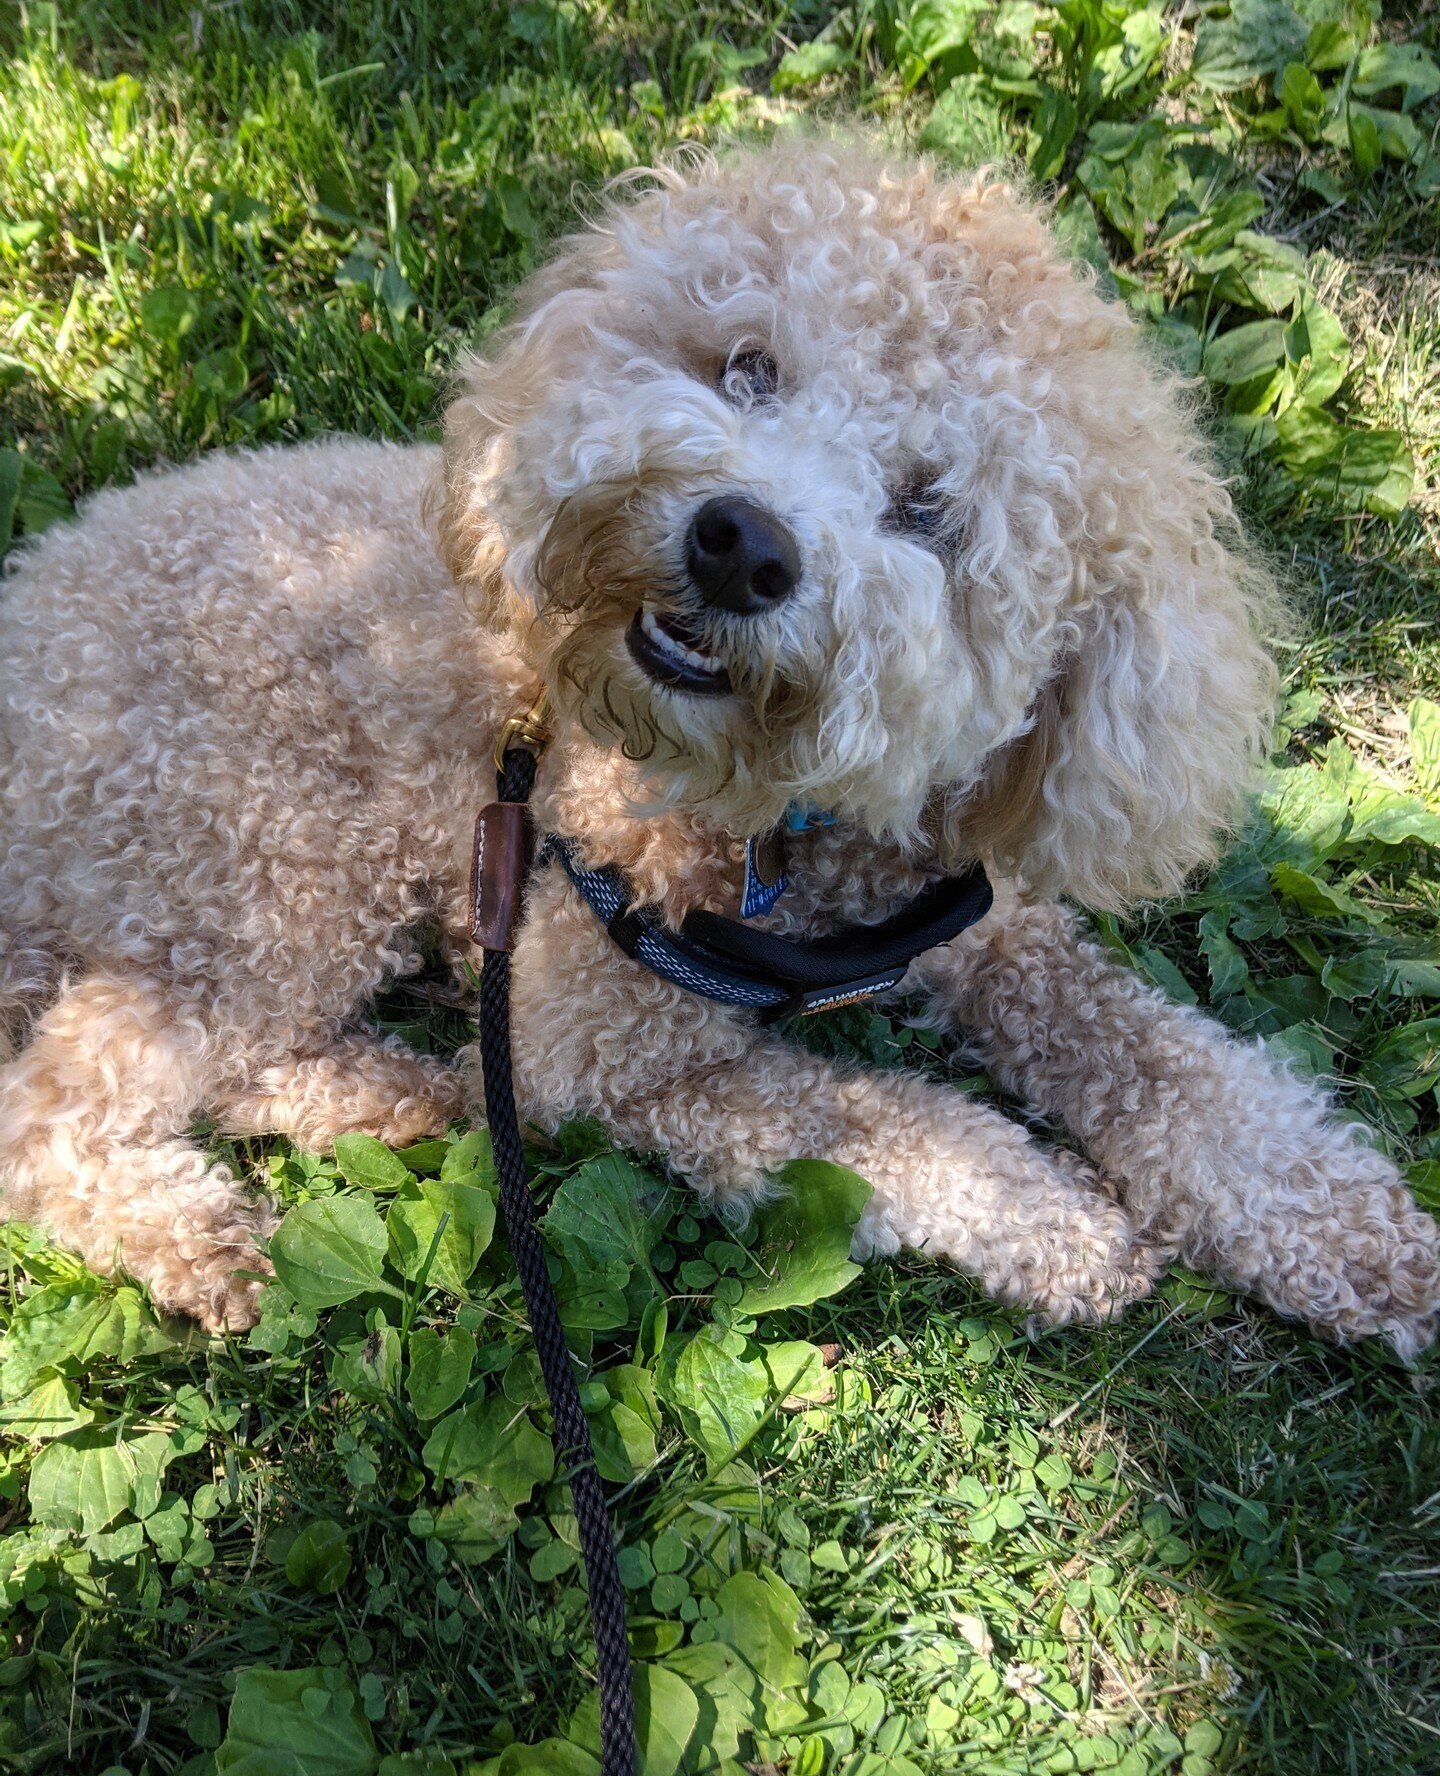 Meet PGY2 Tommy Ng's @tom.nom.noms dog, Winnie! ⁠
Winnie can be described in 3 adjectives used by his daycare 'Adorable, Sneaky, Frisky'. He loves to cuddle and eat fruits and veggies for treats. In the summer he loves run down the lakefront trail &a